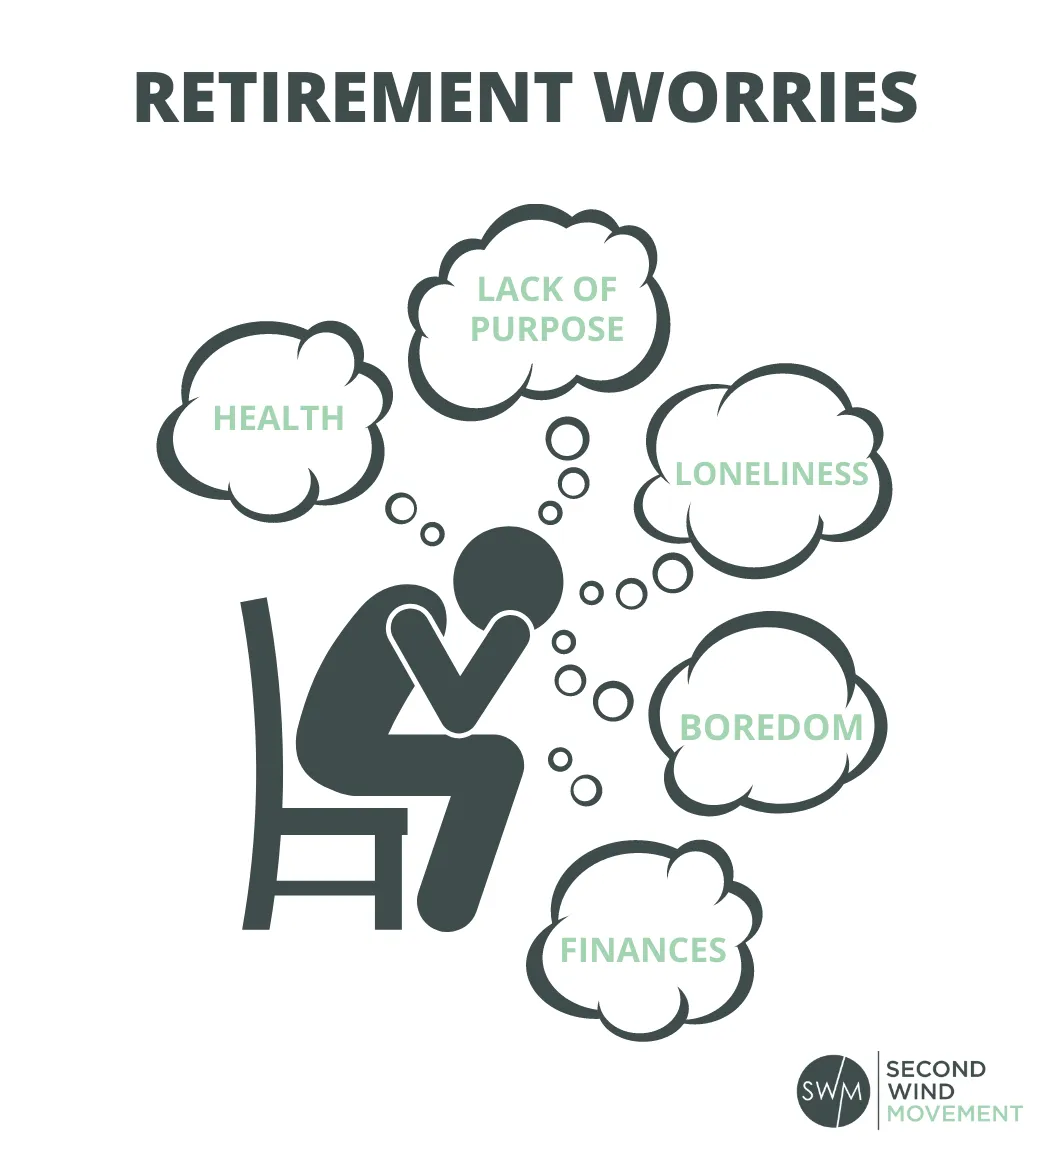 retirement anxiety and worries are usually centered around health, lack of purpose, loneliness, boredom and finances